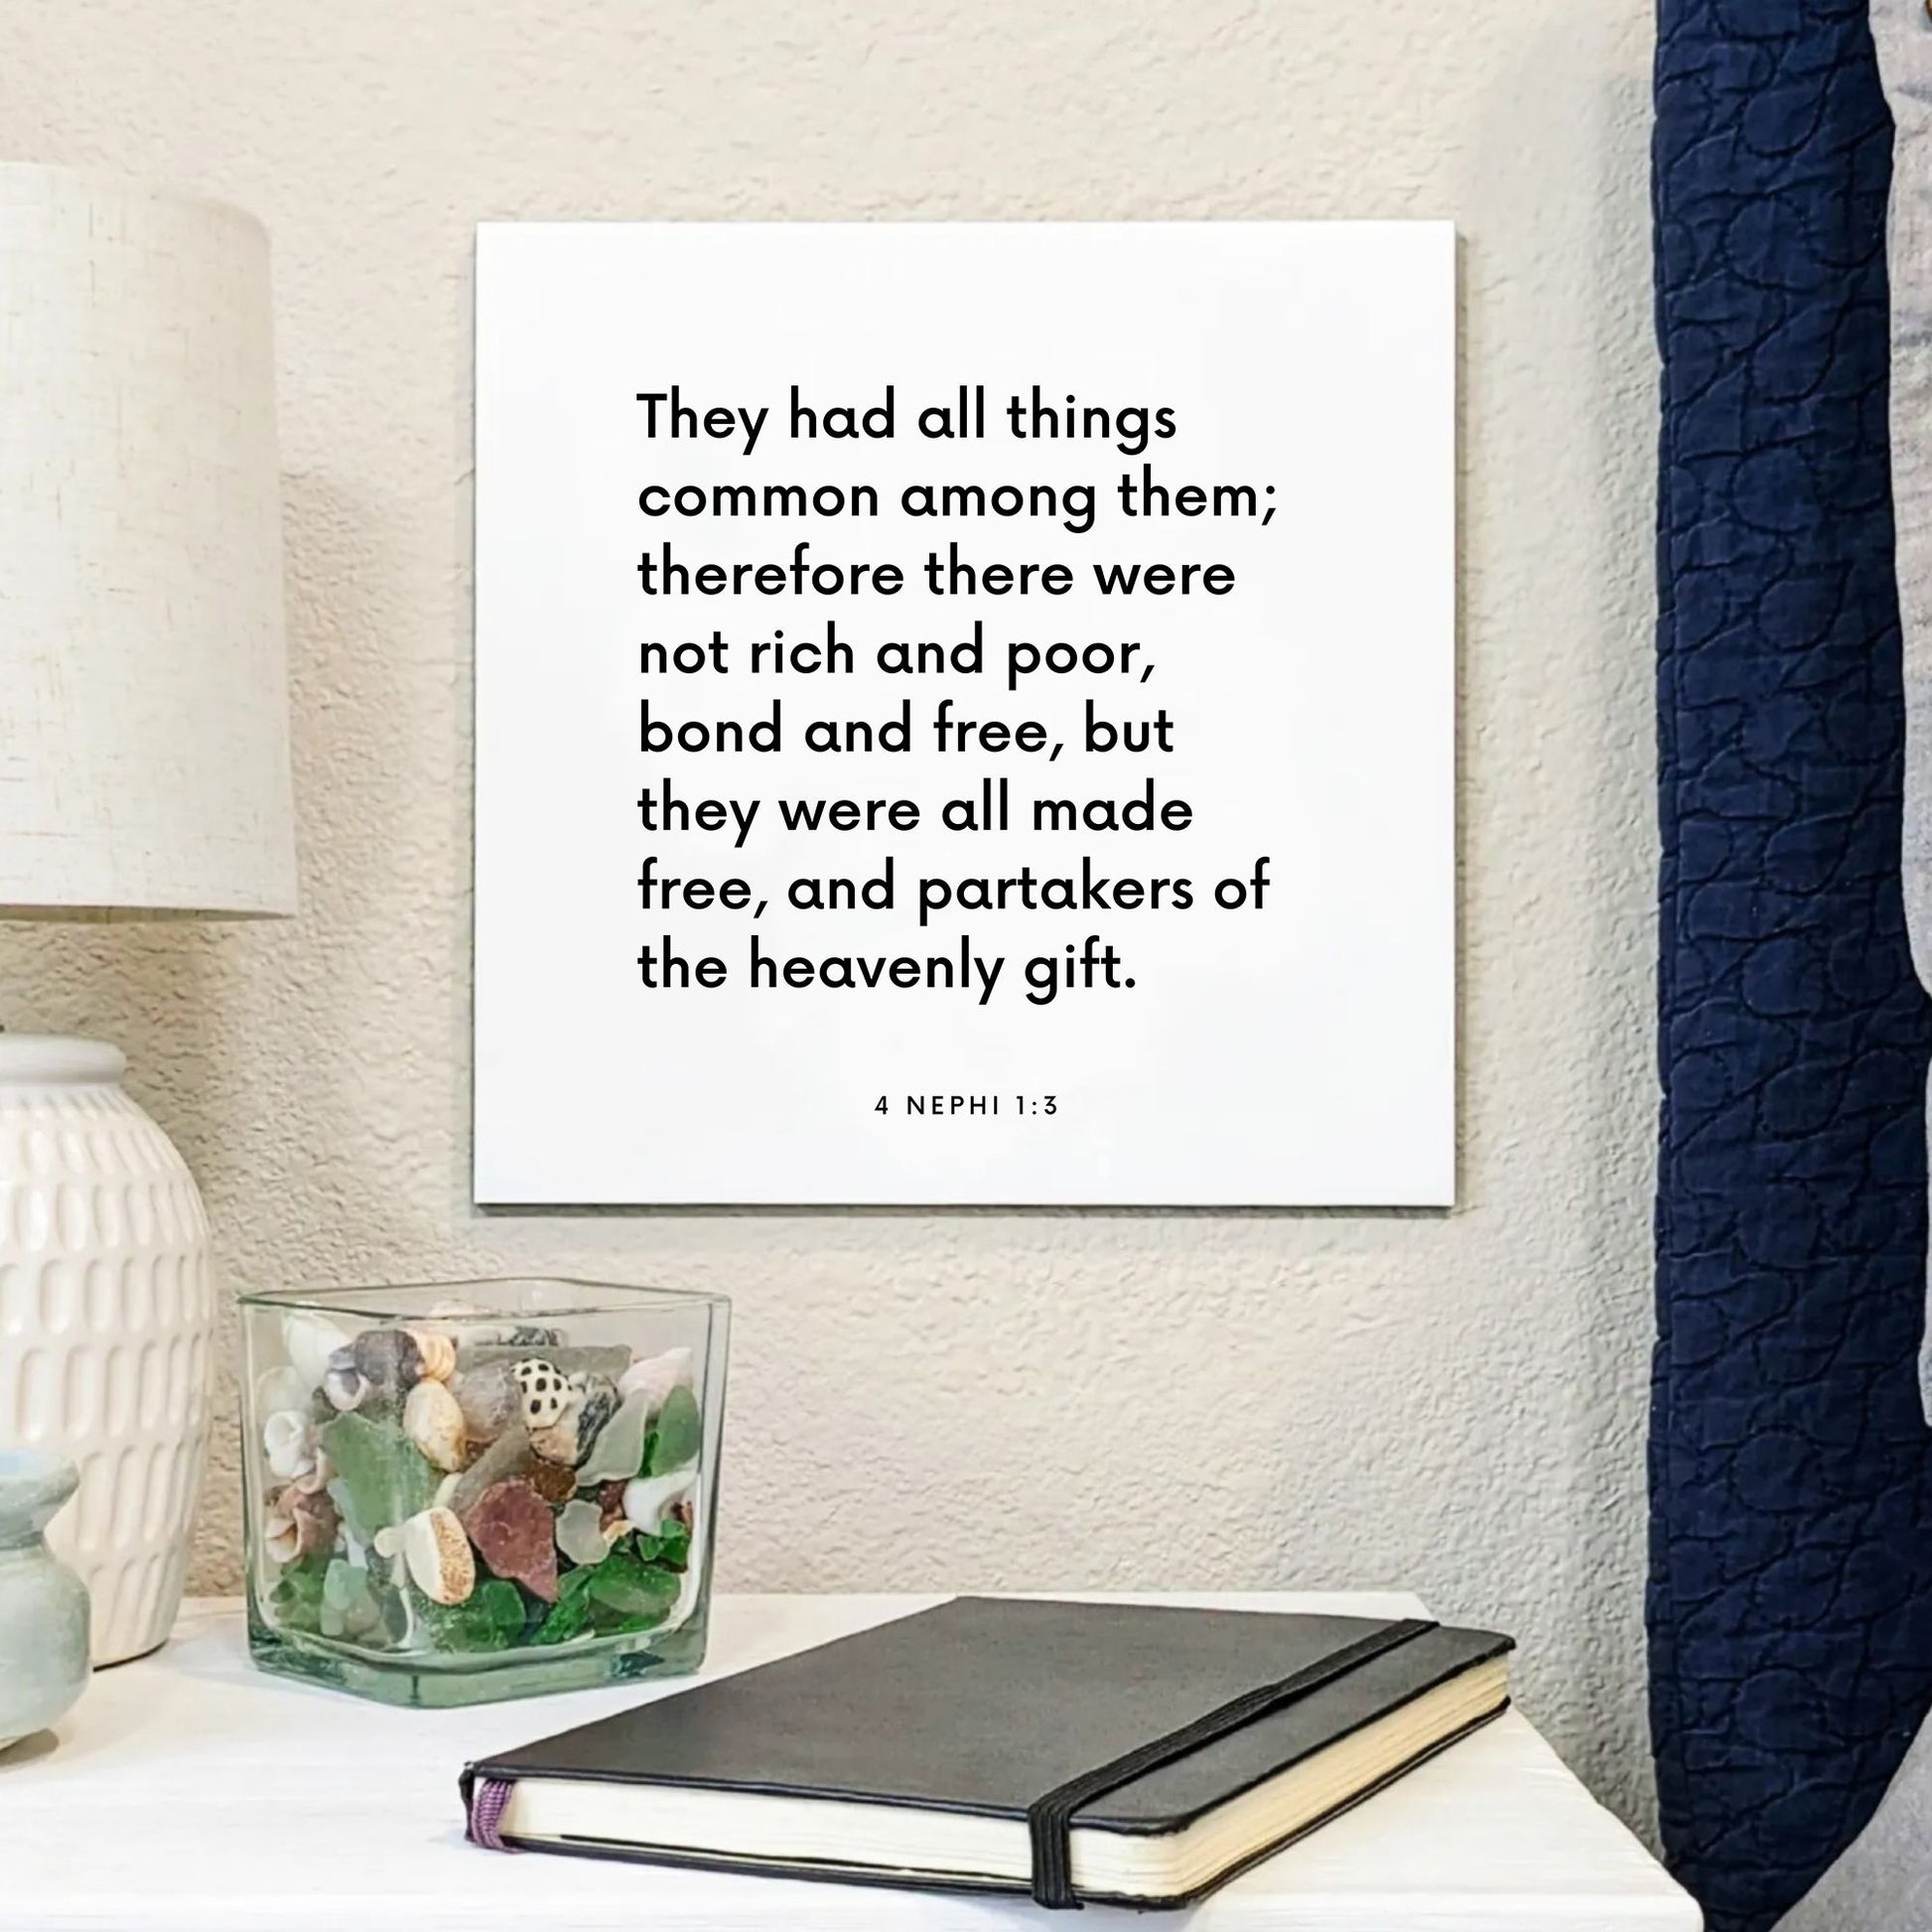 Bedside mouting of the scripture tile for 4 Nephi 1:3 - "They were all made free, and partakers of the heavenly gift"